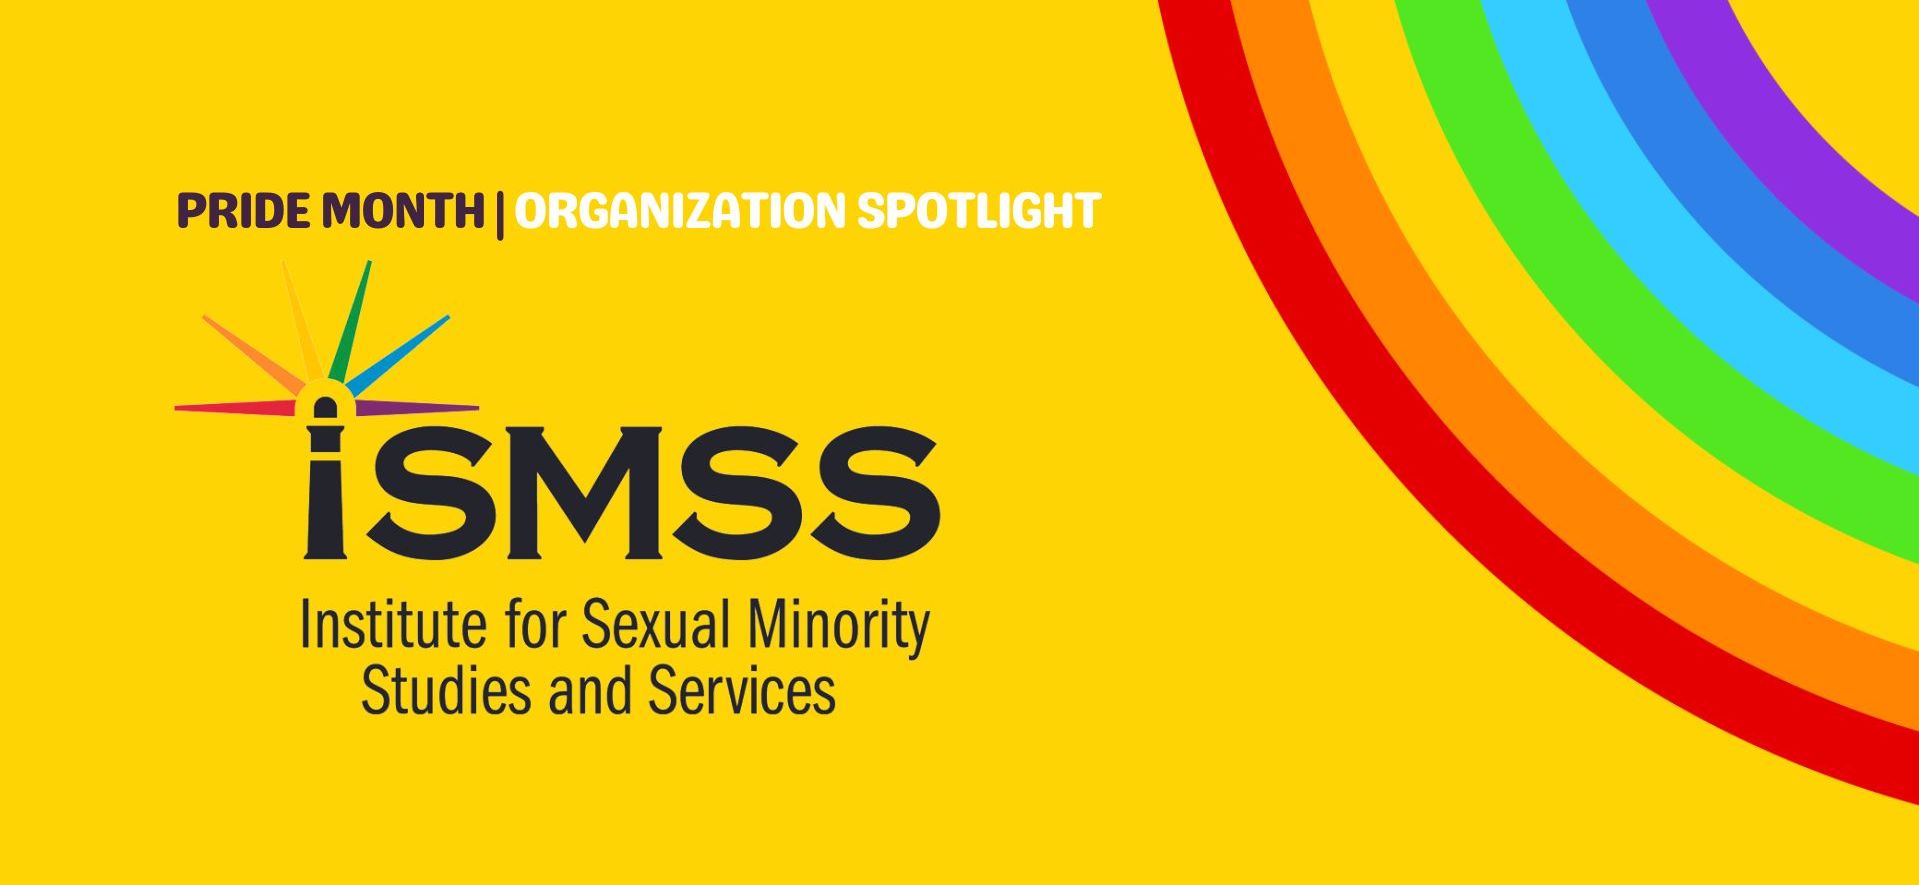 Institute for Sexual Minority Studies and Services (iSMSS)